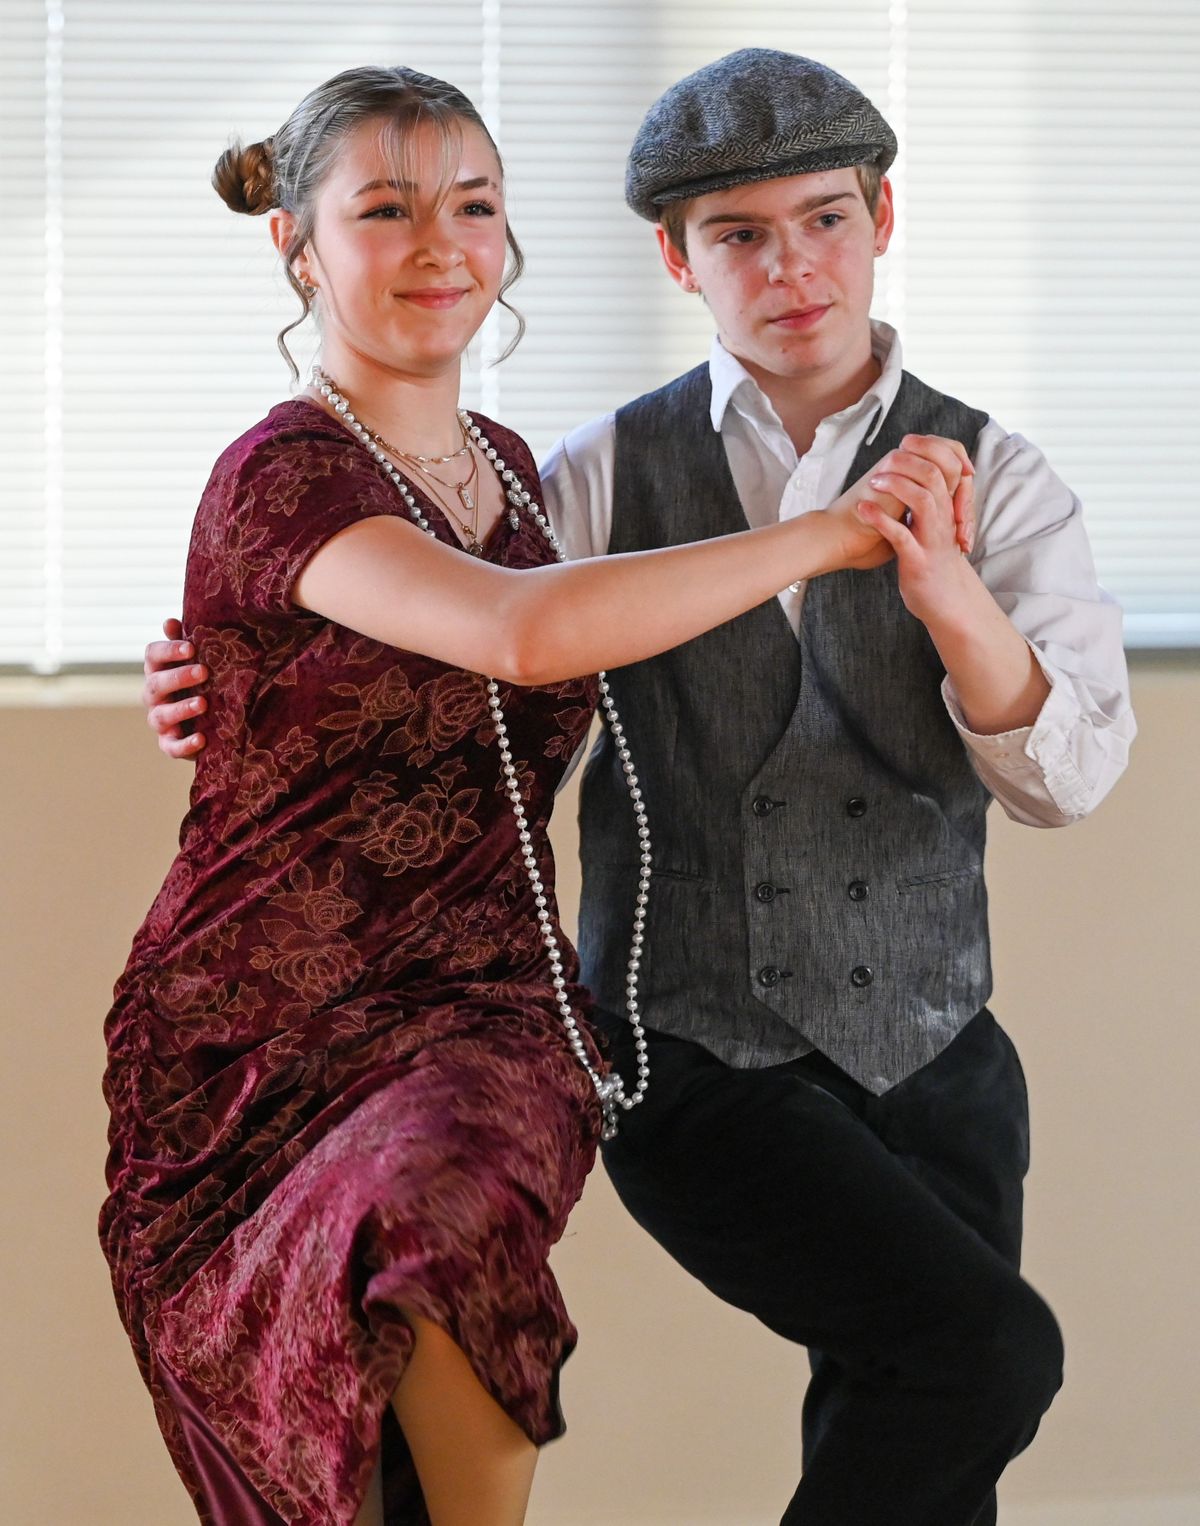 Rosamond Grim, 16, and Lowell Geottert, 15, perform the black bottom, a 1920s swing dance during rehearsals Tuesday, April 9, 2024 at the Silver Spurs rehearsal studio in Spokane, Washington. The population of the longstanding dance troupe, which performed at Expo ‘74 50 years ago, has taken a hit during the COVID era. The program teaches kids a variety of ethnic and recreational dances.  (Jesse Tinsley/The Spokesman-Review)